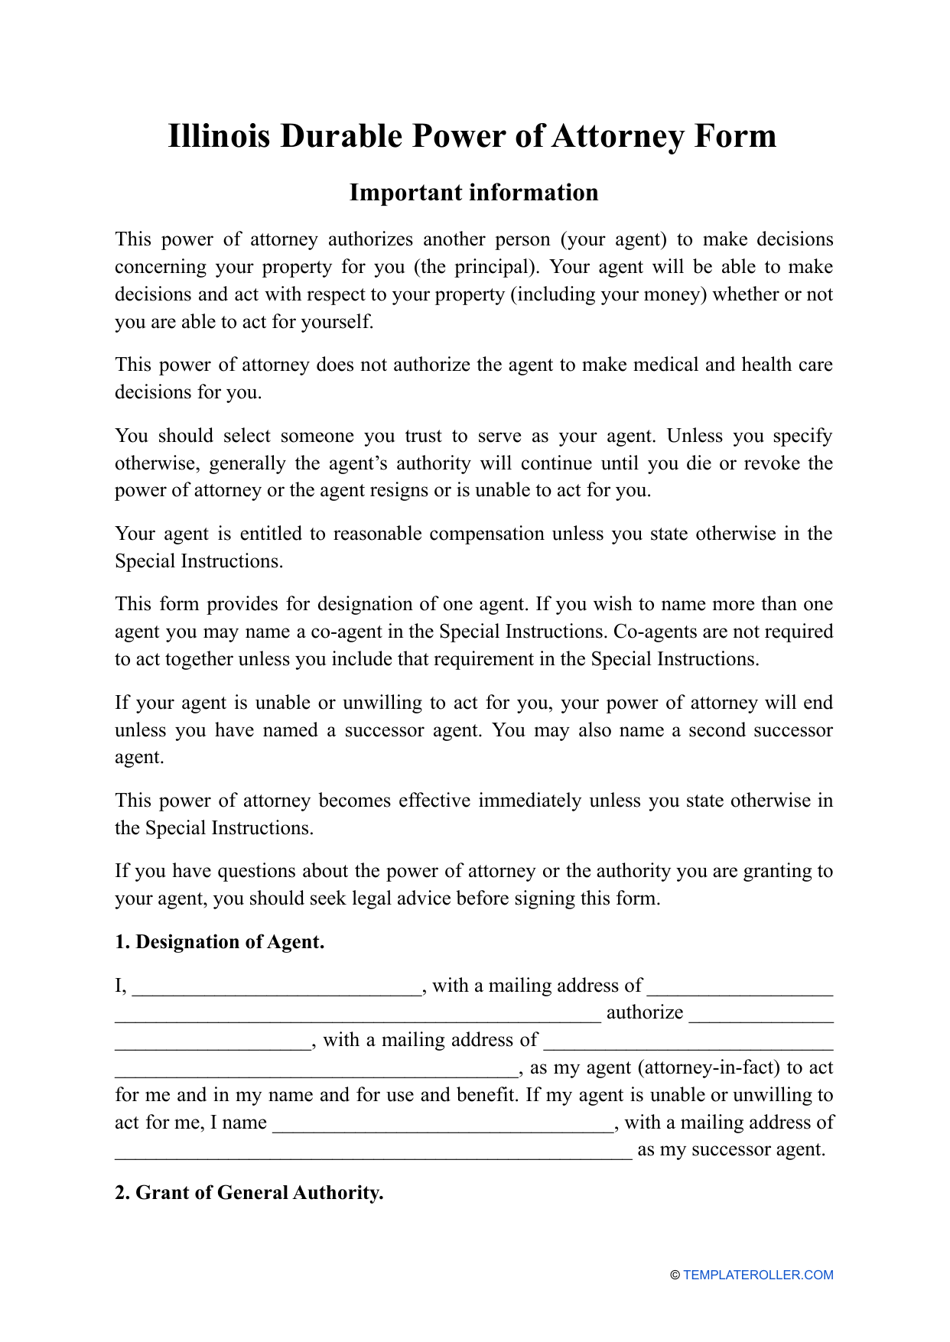 Durable Power of Attorney Form - Illinois, Page 1